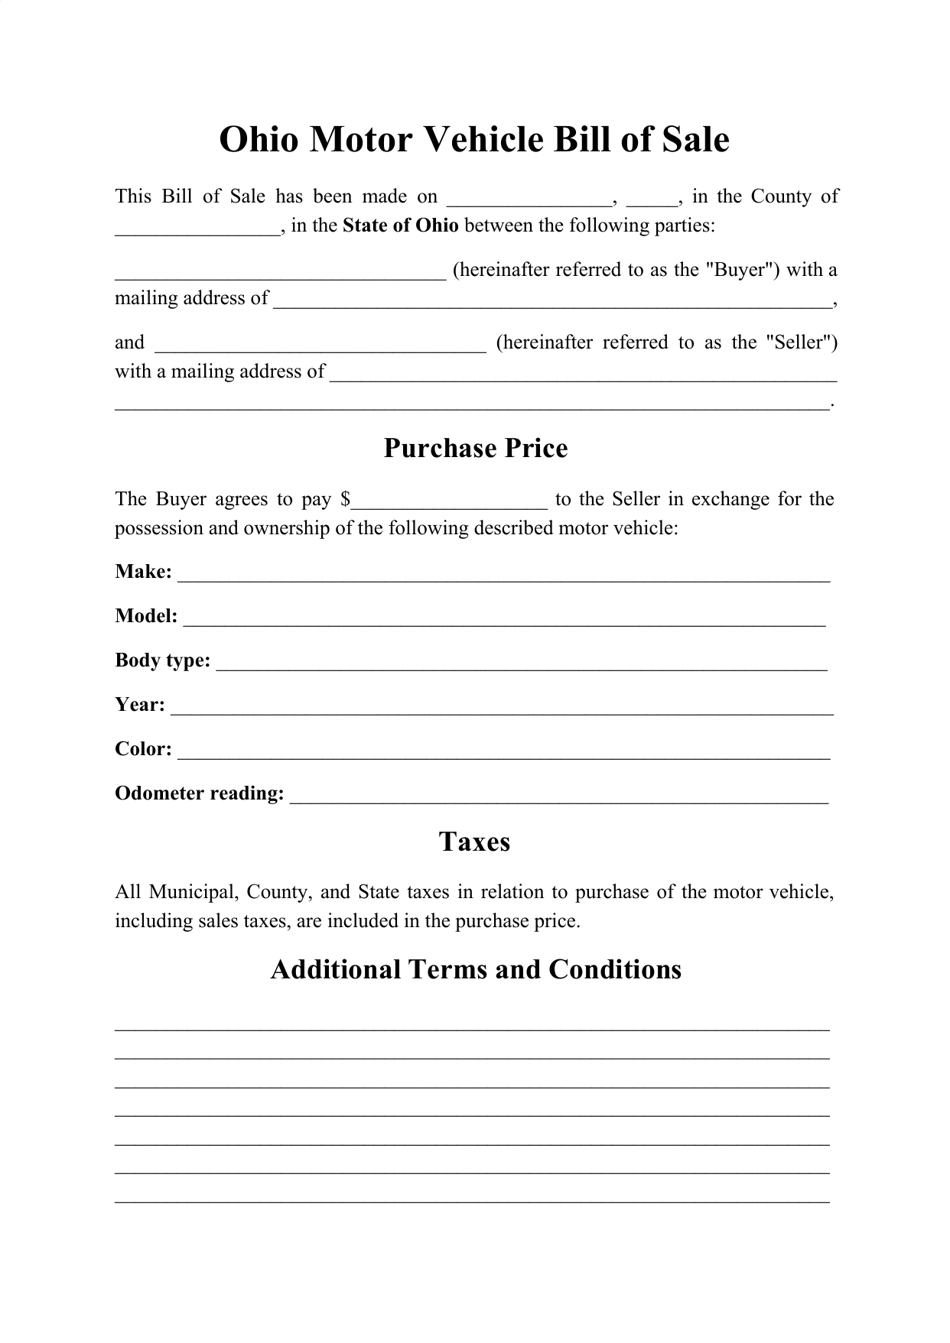 ohio-motor-vehicle-bill-of-sale-form-fill-out-sign-online-and